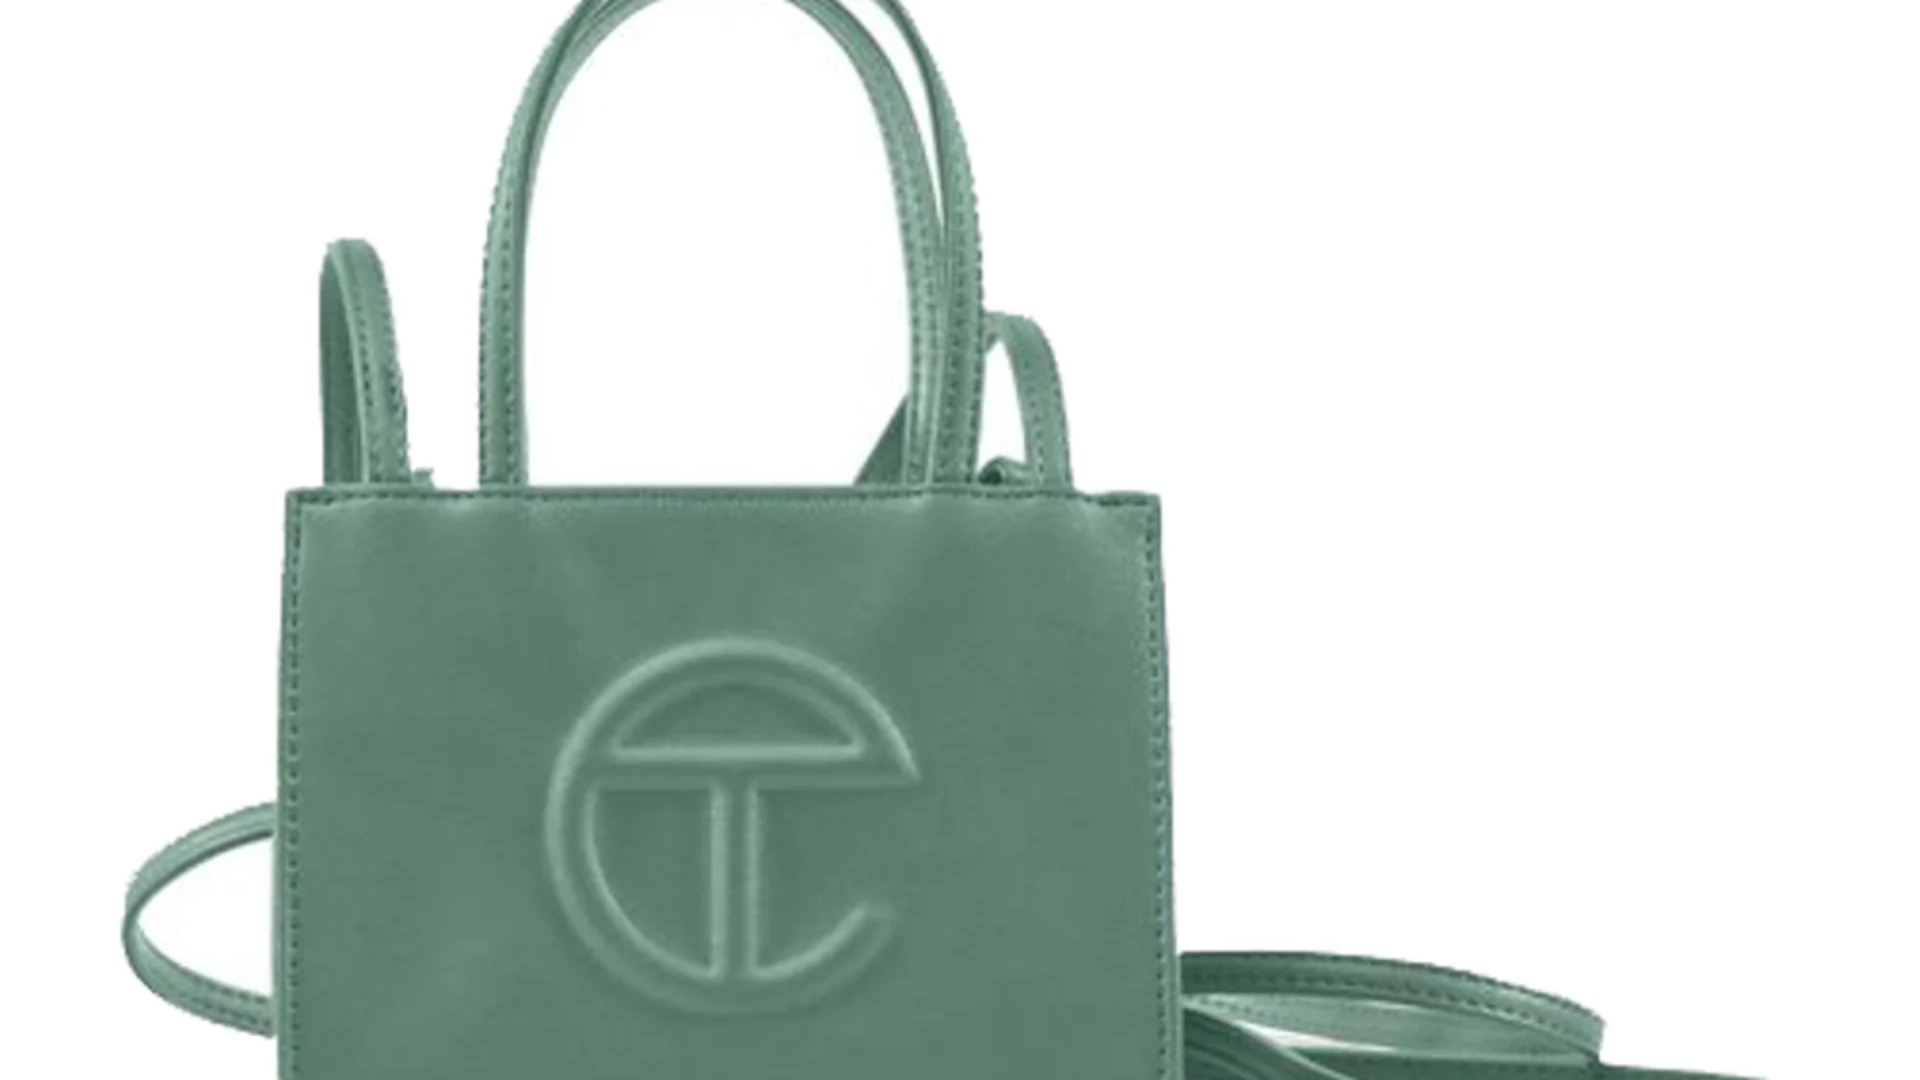 Telfar Debuted A New Shopping Bag. Within Days, One Site Resold